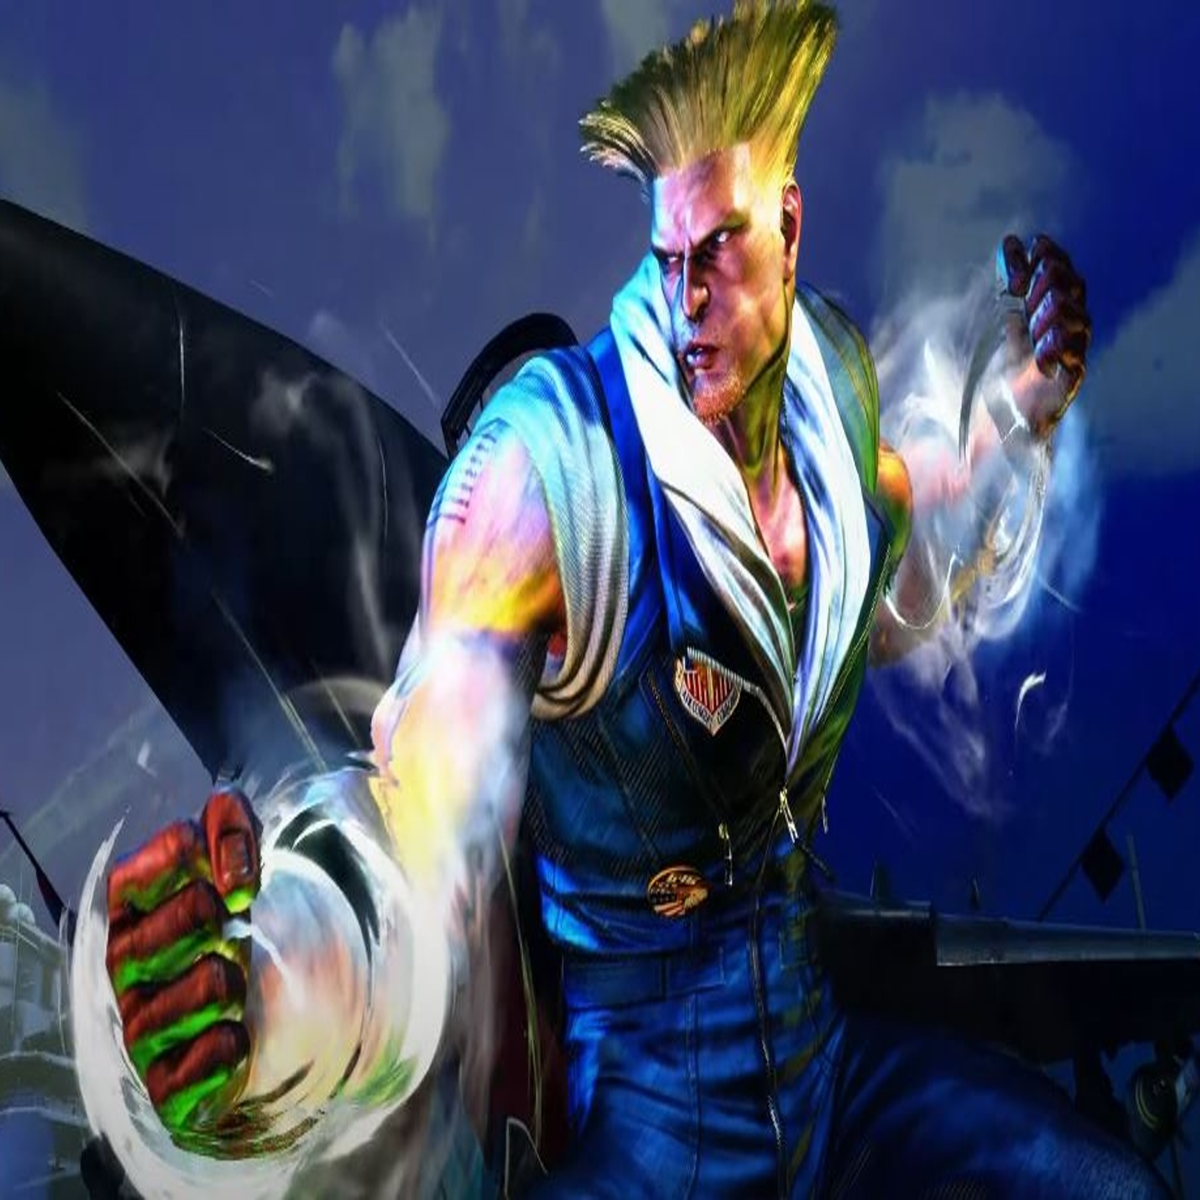 The Judge  Street fighter art, Street fighter characters, Street fighter